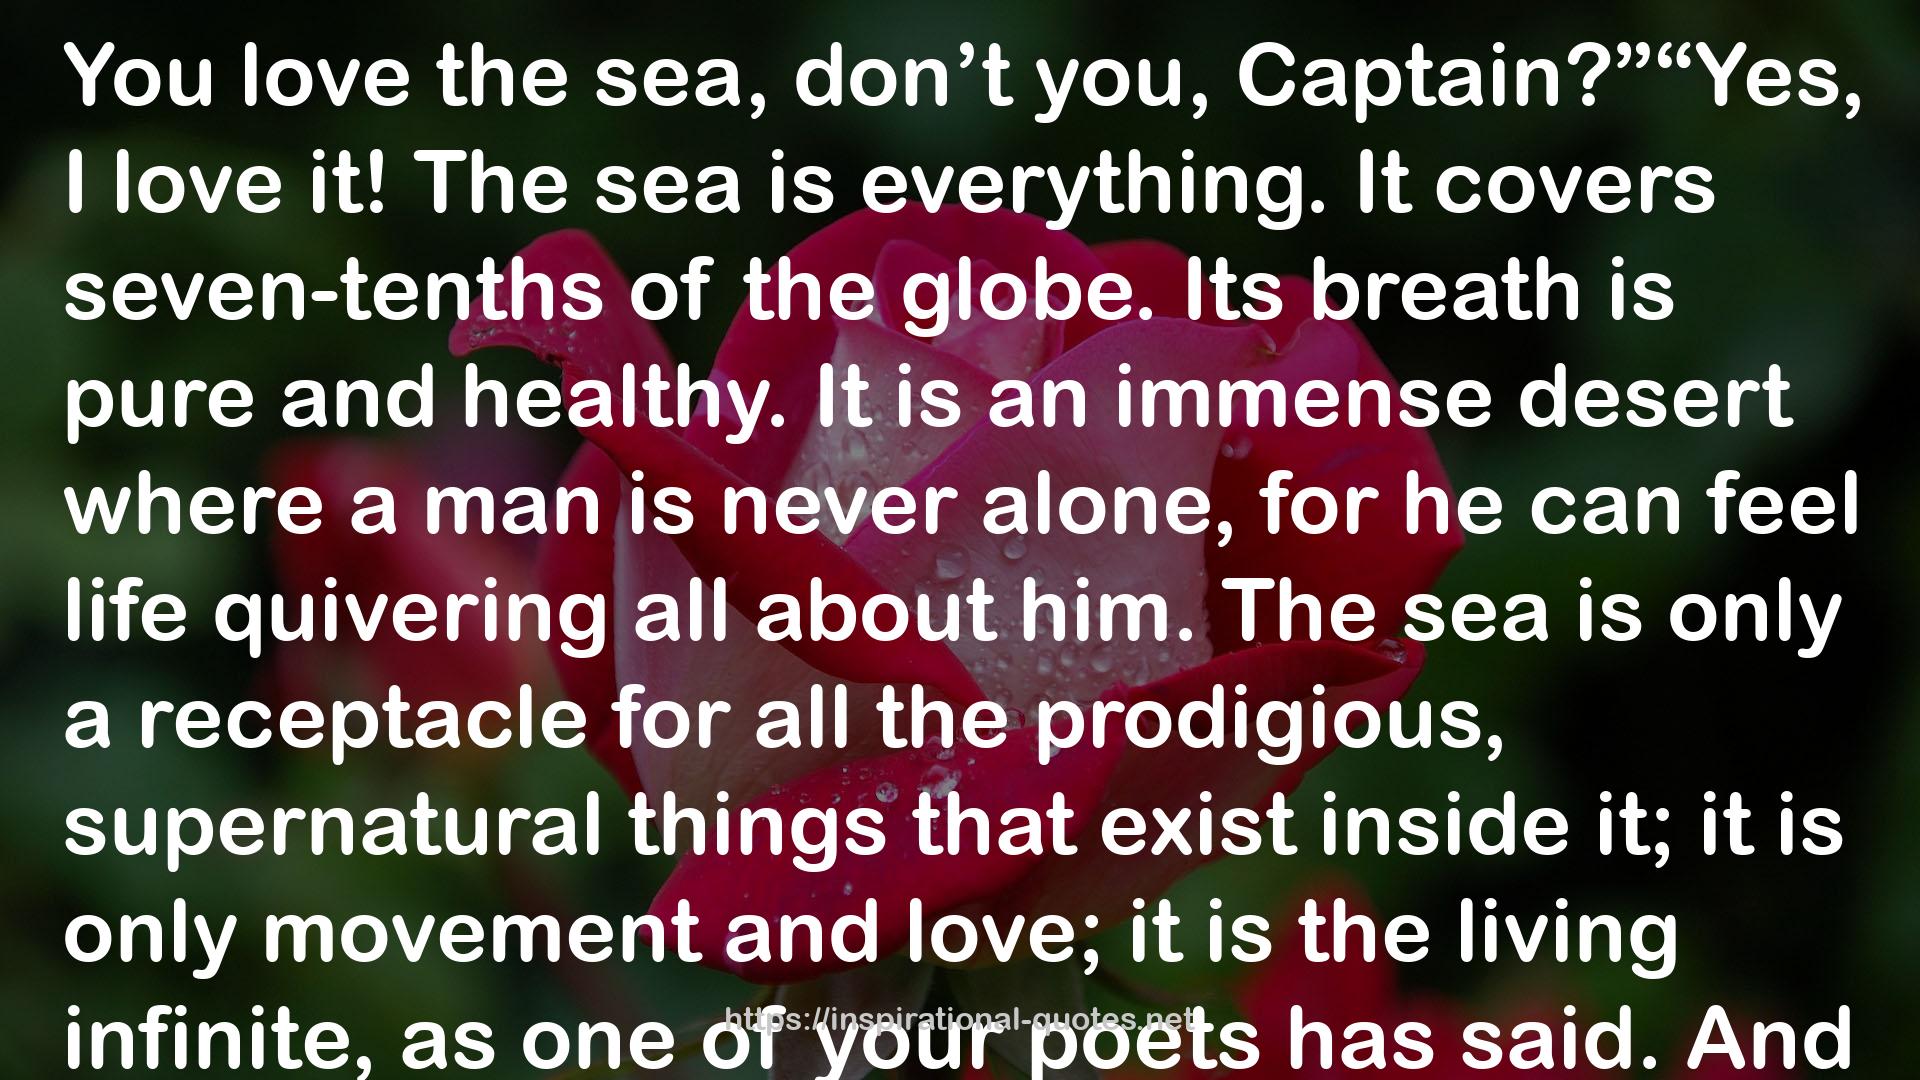 20,000 Leagues Under the Sea and other Classic Novels QUOTES